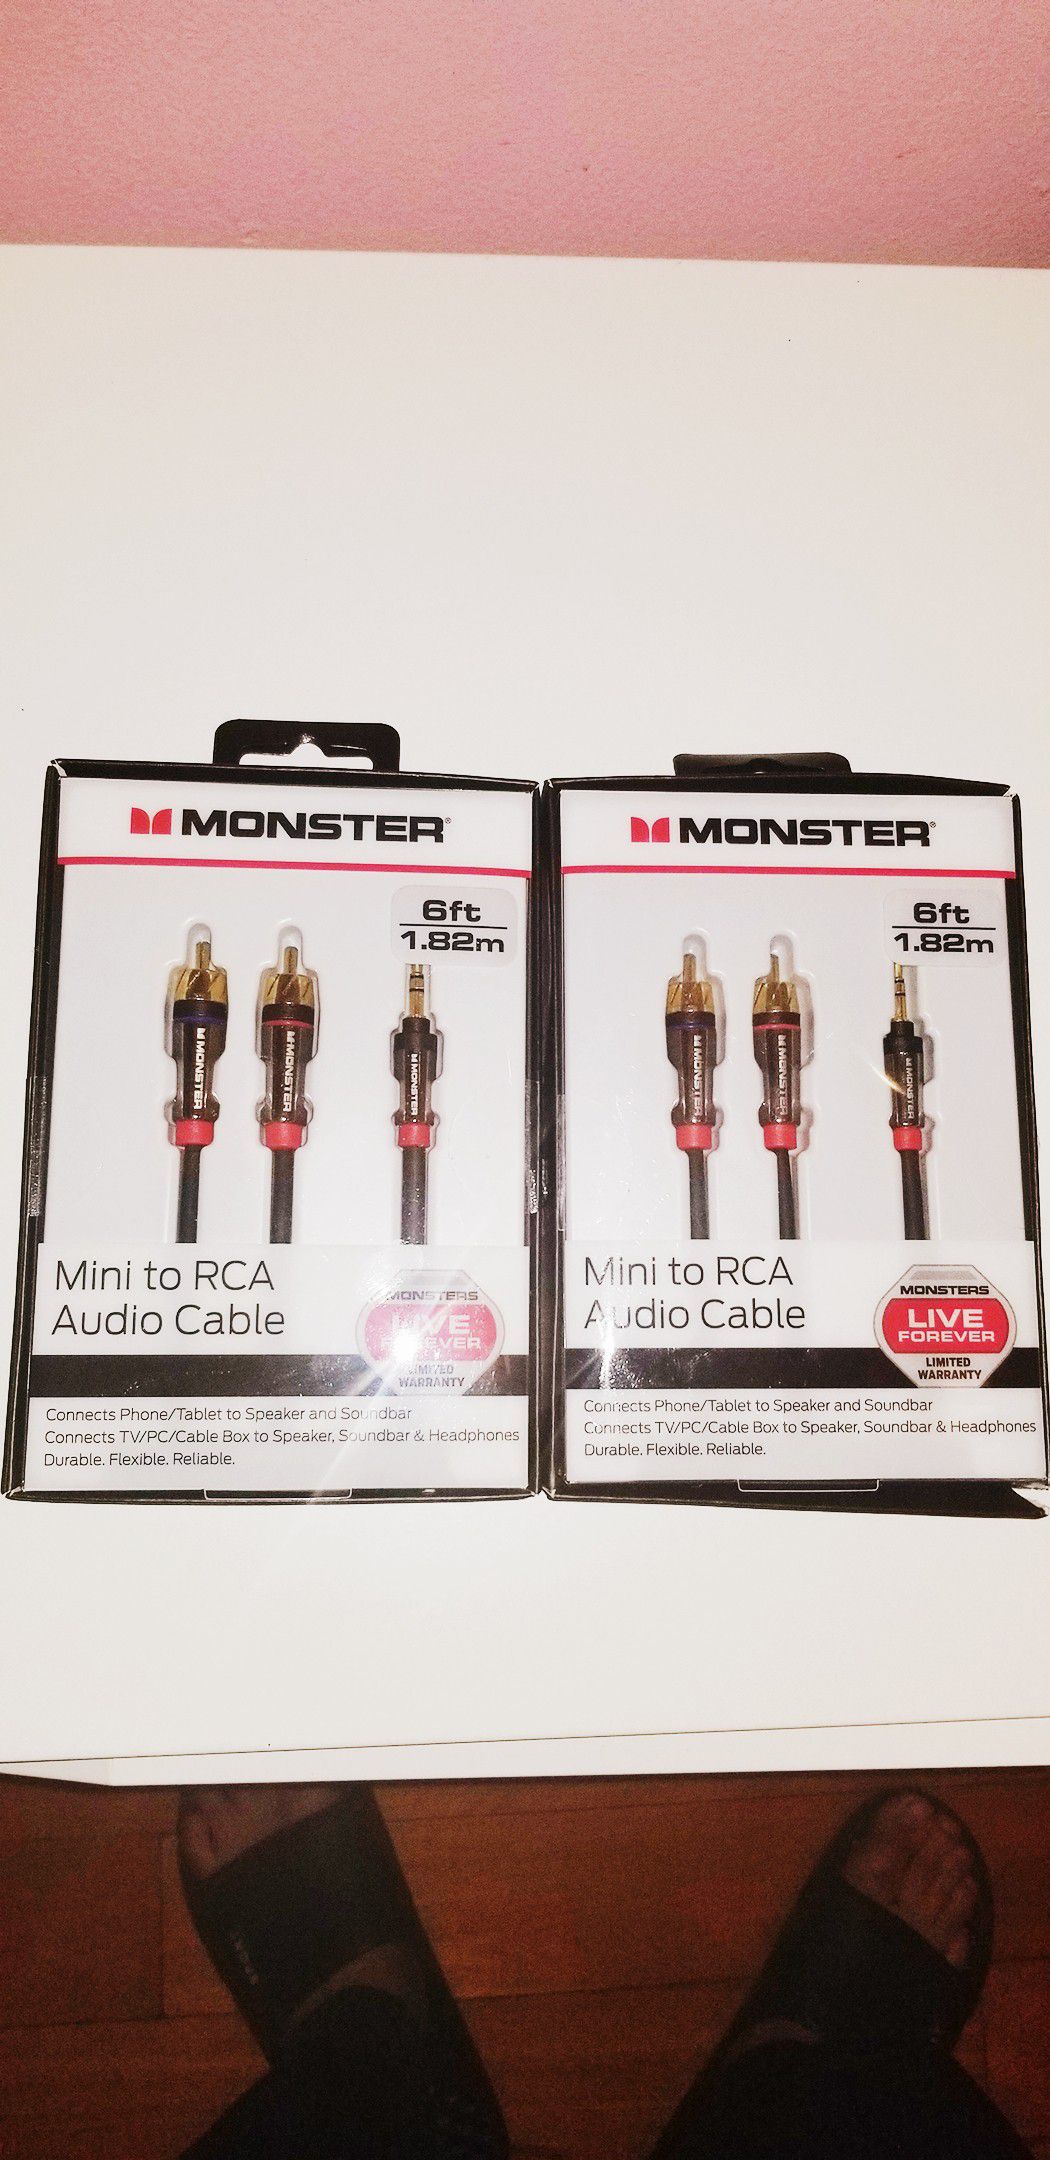 2 BRAND NEW MONSTER 6FT AUDIO CABLE BUNDLE